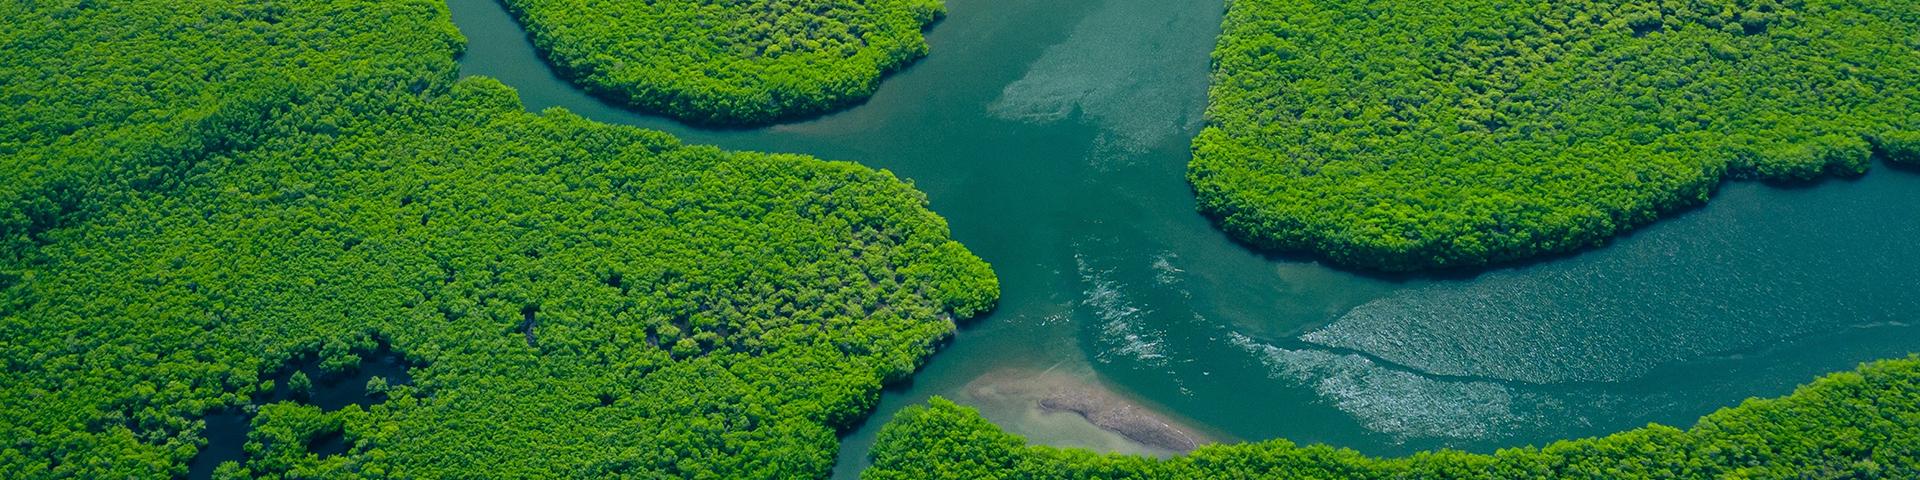 Aquatic landscape with lush vegetation seen from above.